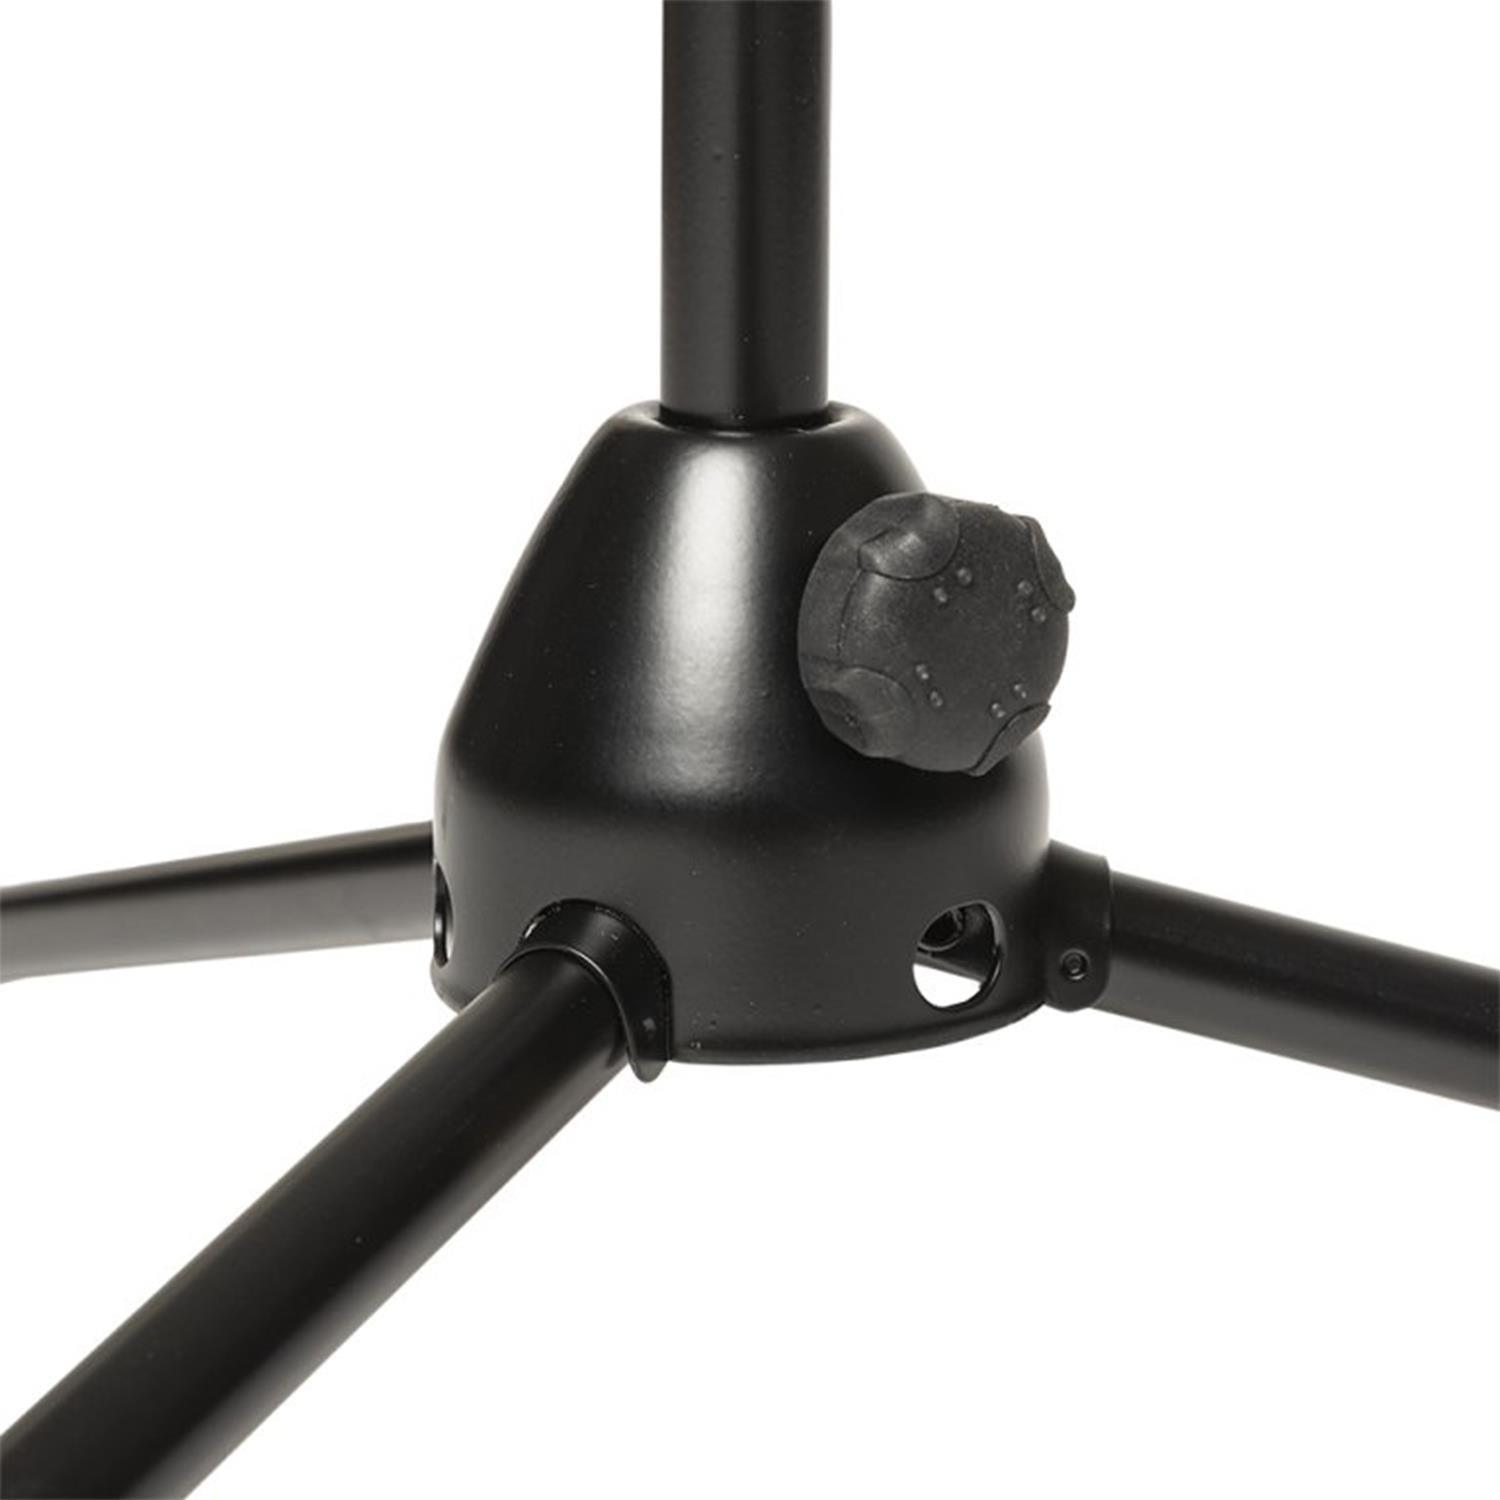 Stagg MIS-1020BK Tripod Microphone Floor Stand - DY Pro Audio